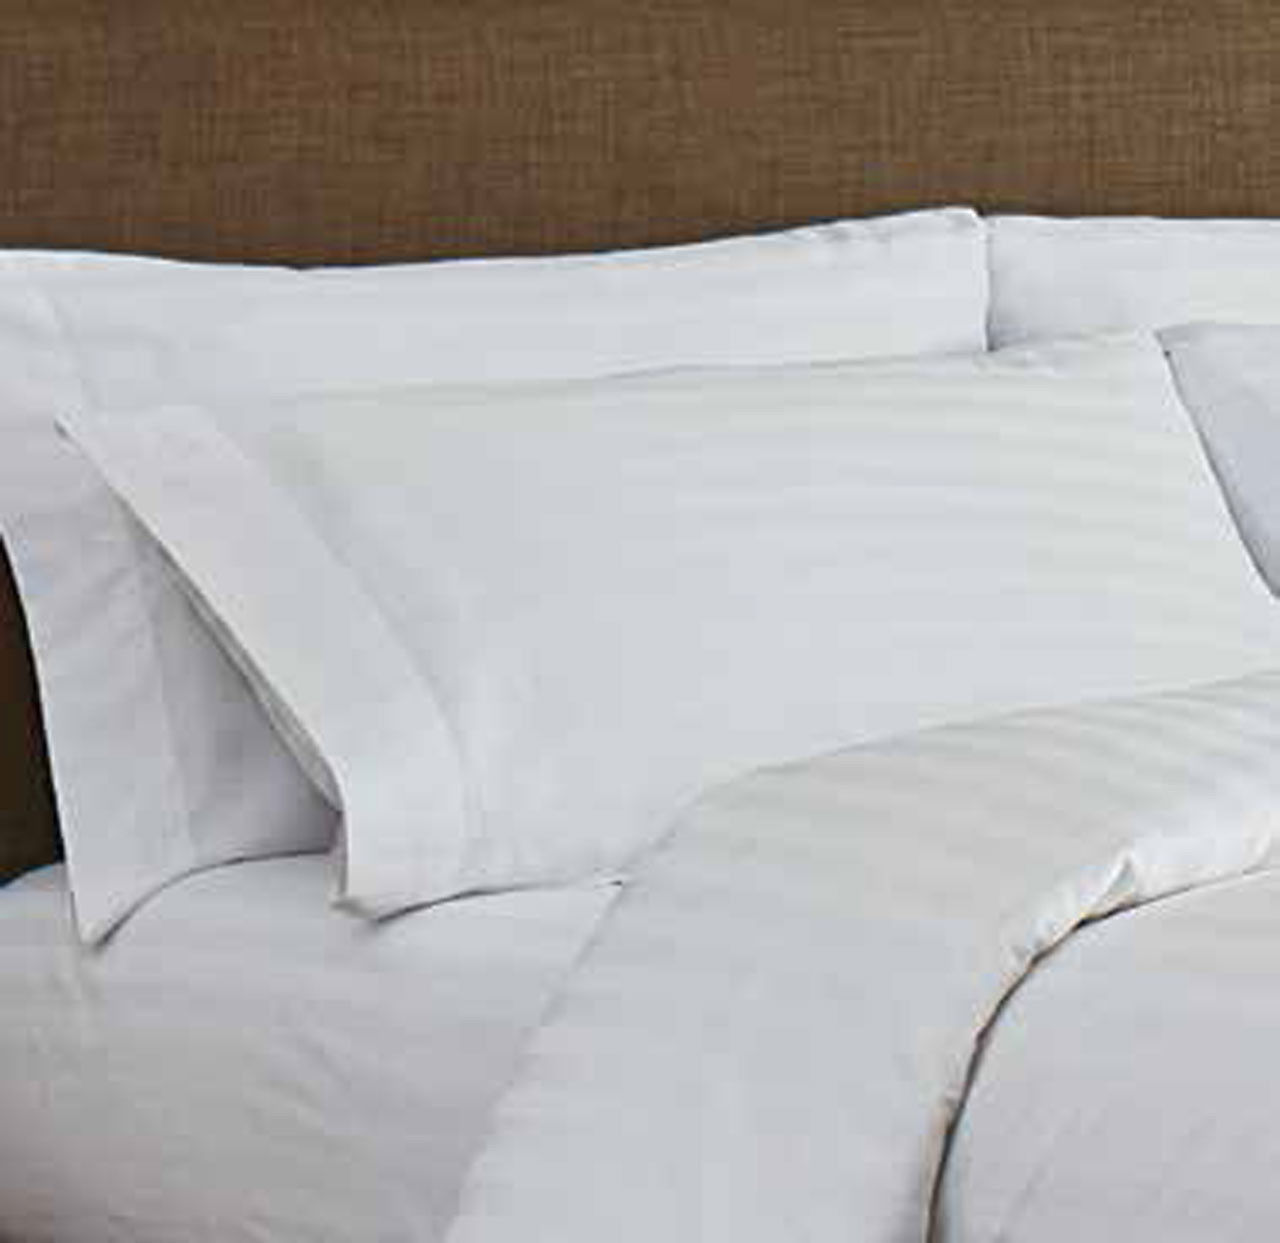 Welspun T-220 White Tone on Tone Stripe Sheets Questions & Answers